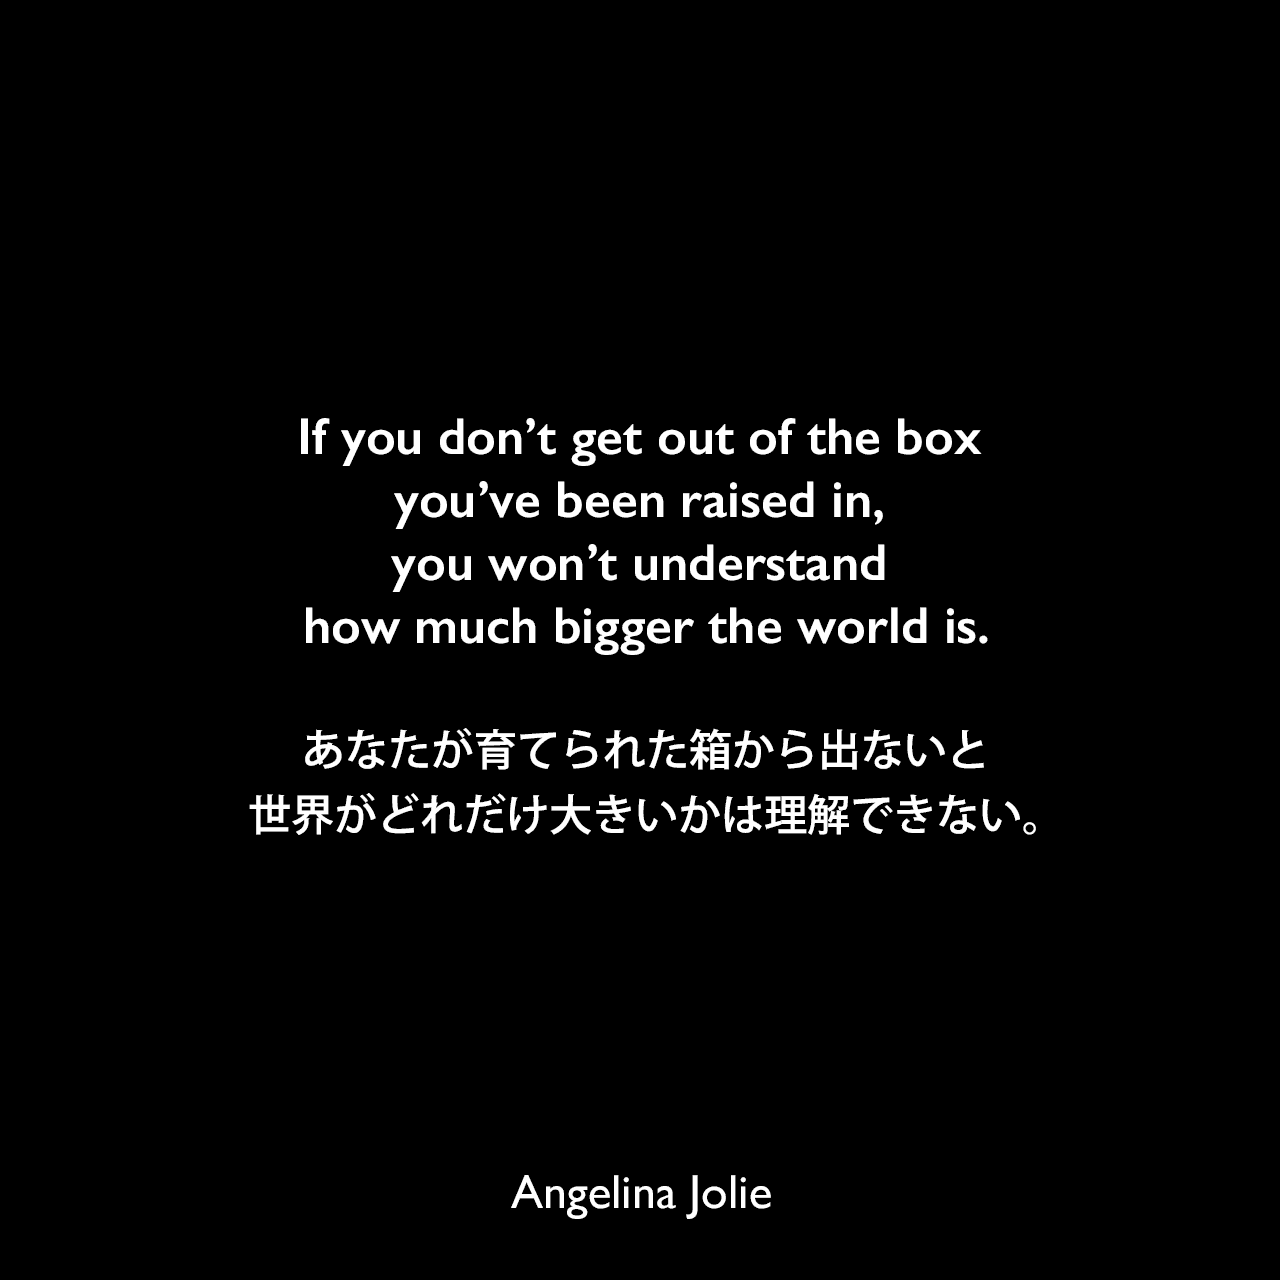 If you don’t get out of the box you’ve been raised in, you won’t understand how much bigger the world is.あなたが育てられた箱から出ないと、世界がどれだけ大きいかは理解できない。Angelina Jolie